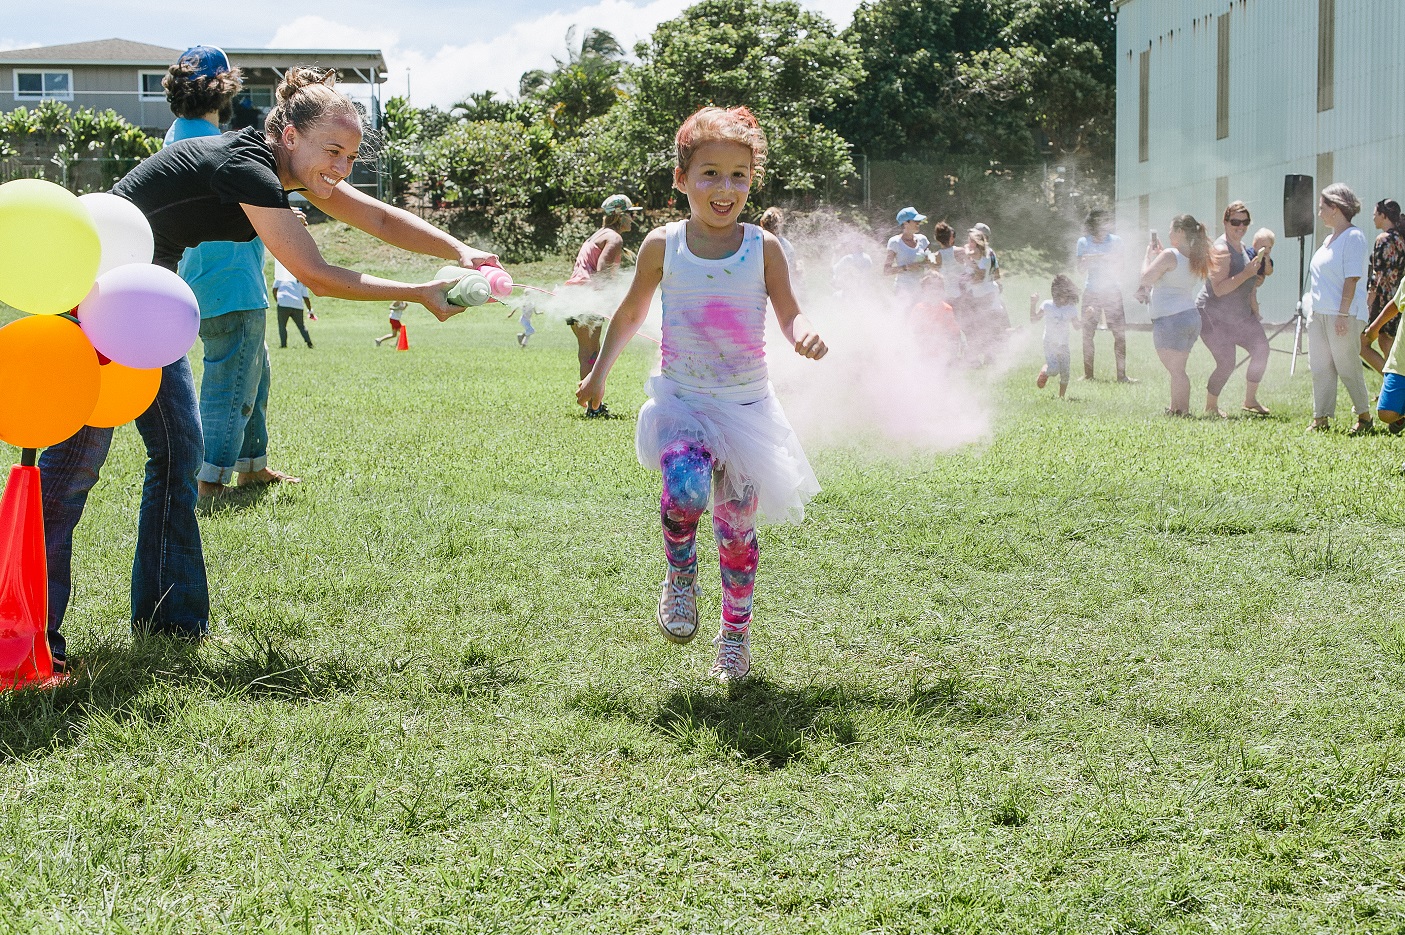 Haʻikū Elementary School on Maui, a two-time winner that received $2,500 for its participation in the Fall 2015 and Spring 2016 challenges, used its funds to hold a community Wellness Day with a color run, dancing, yoga, smoothie making and more.